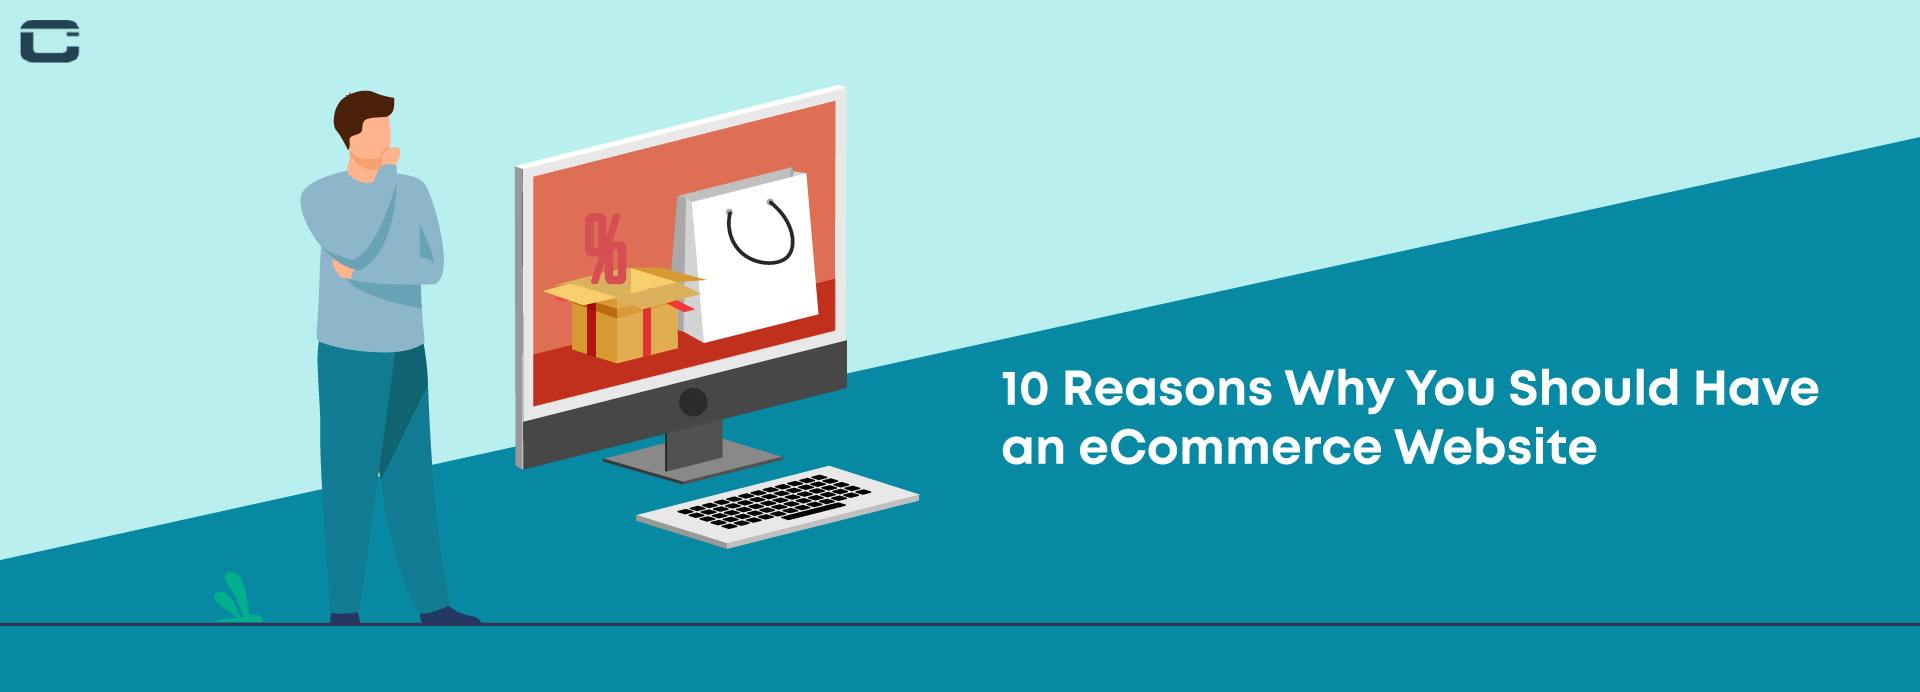 10 Reasons Why You Should Have an e-Commerce Website